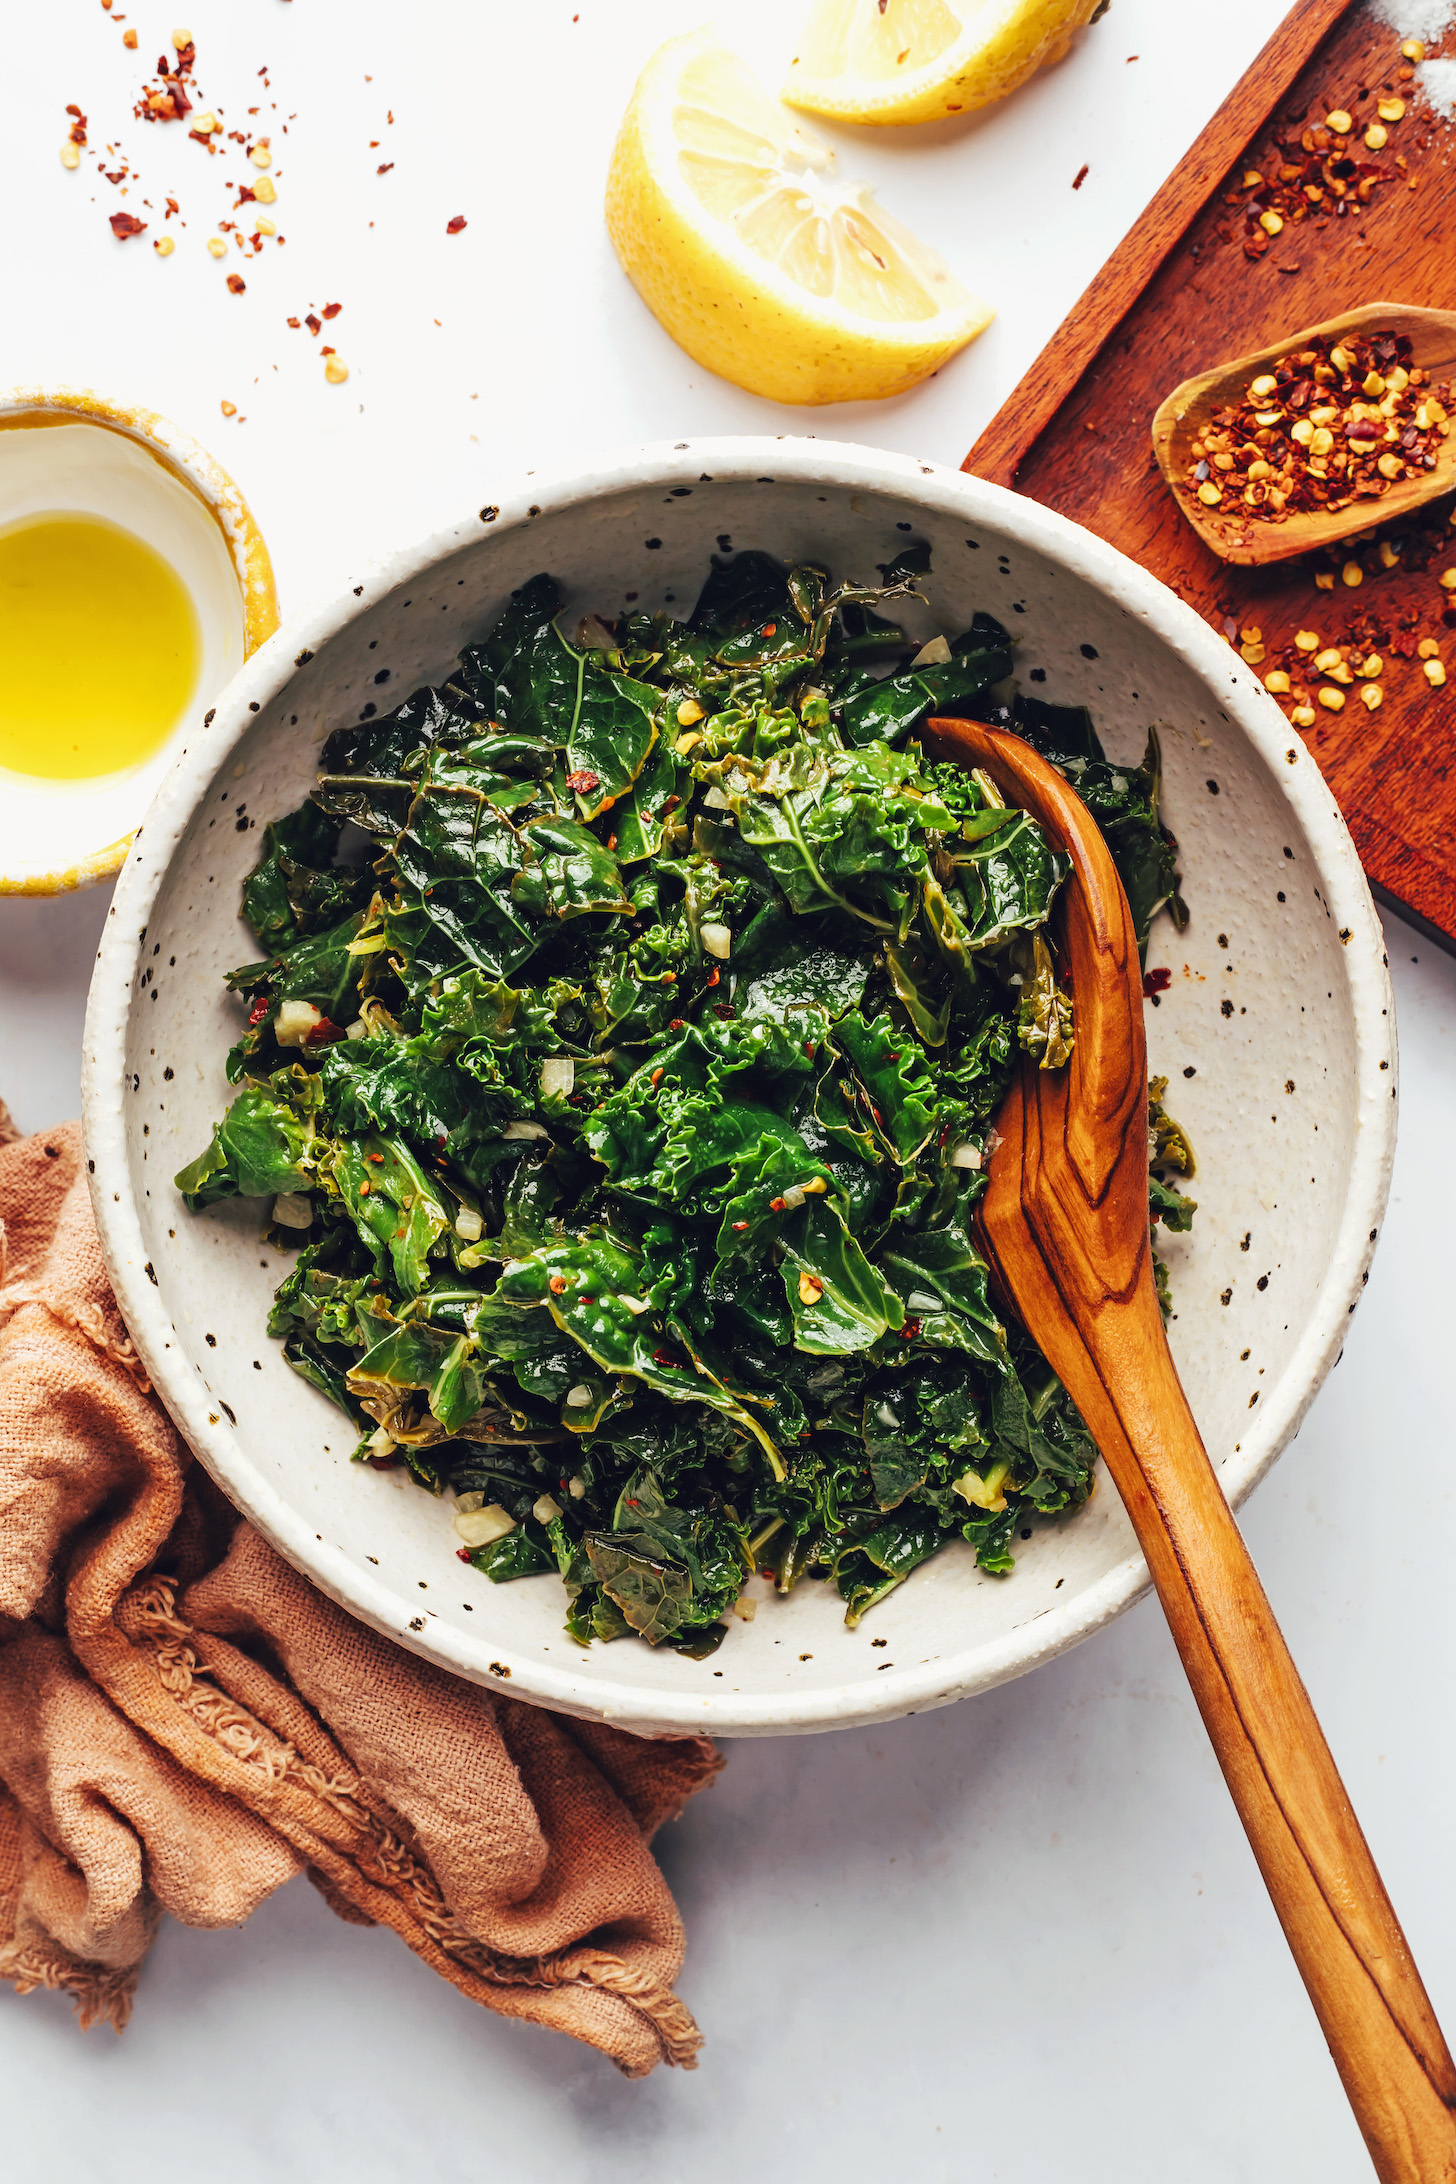 Olive oil, lemon wedges, and red pepper flakes around a bowl of sautéed garlicky greens